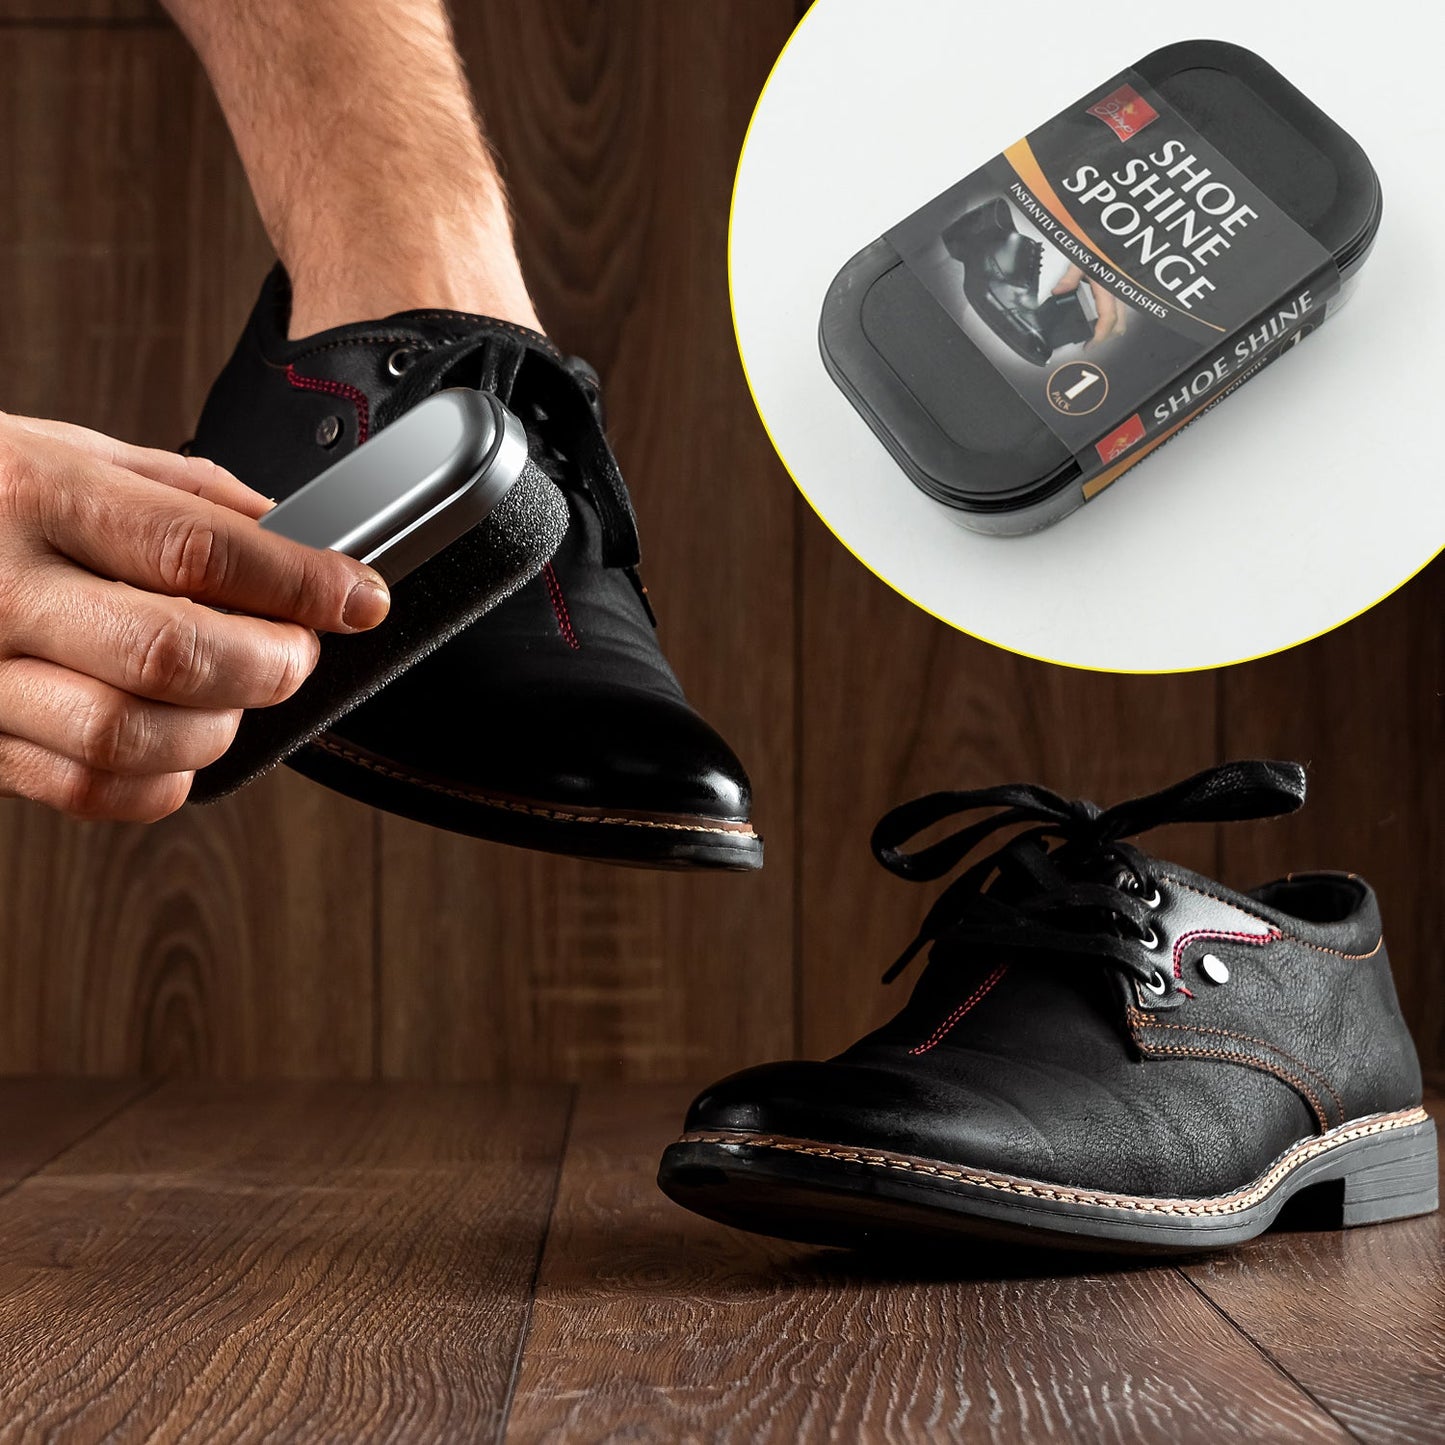 7559 Shoe Shiner and Shoe Polish For All Colours Leather Shoes, Formal Shoes, Oxford Shoes & Dress Shoes (1 Pc)